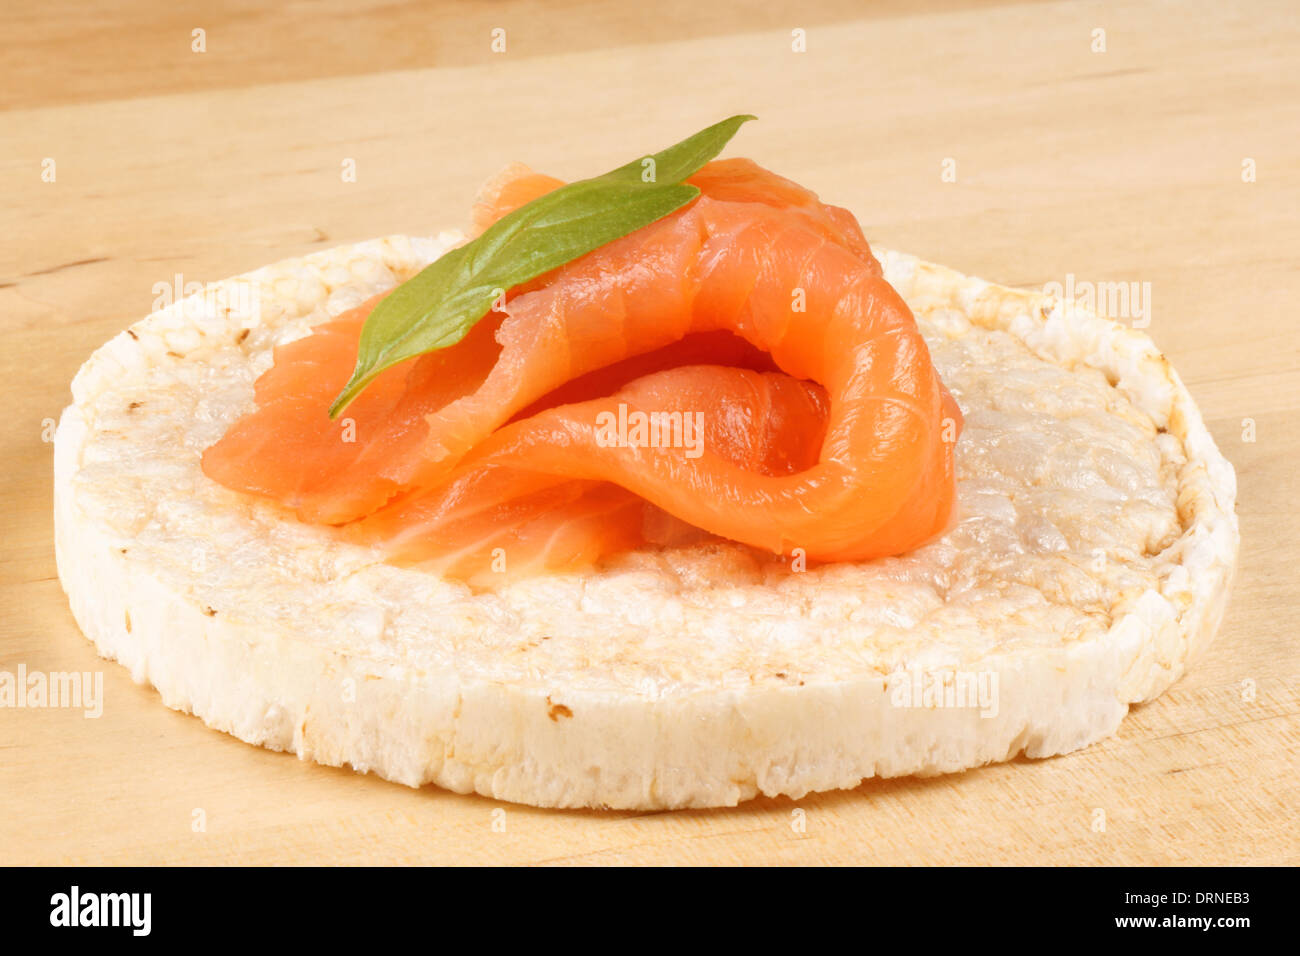 Close-up of a rice cake with smoked salmon and basil, over a wooden background. Stock Photo